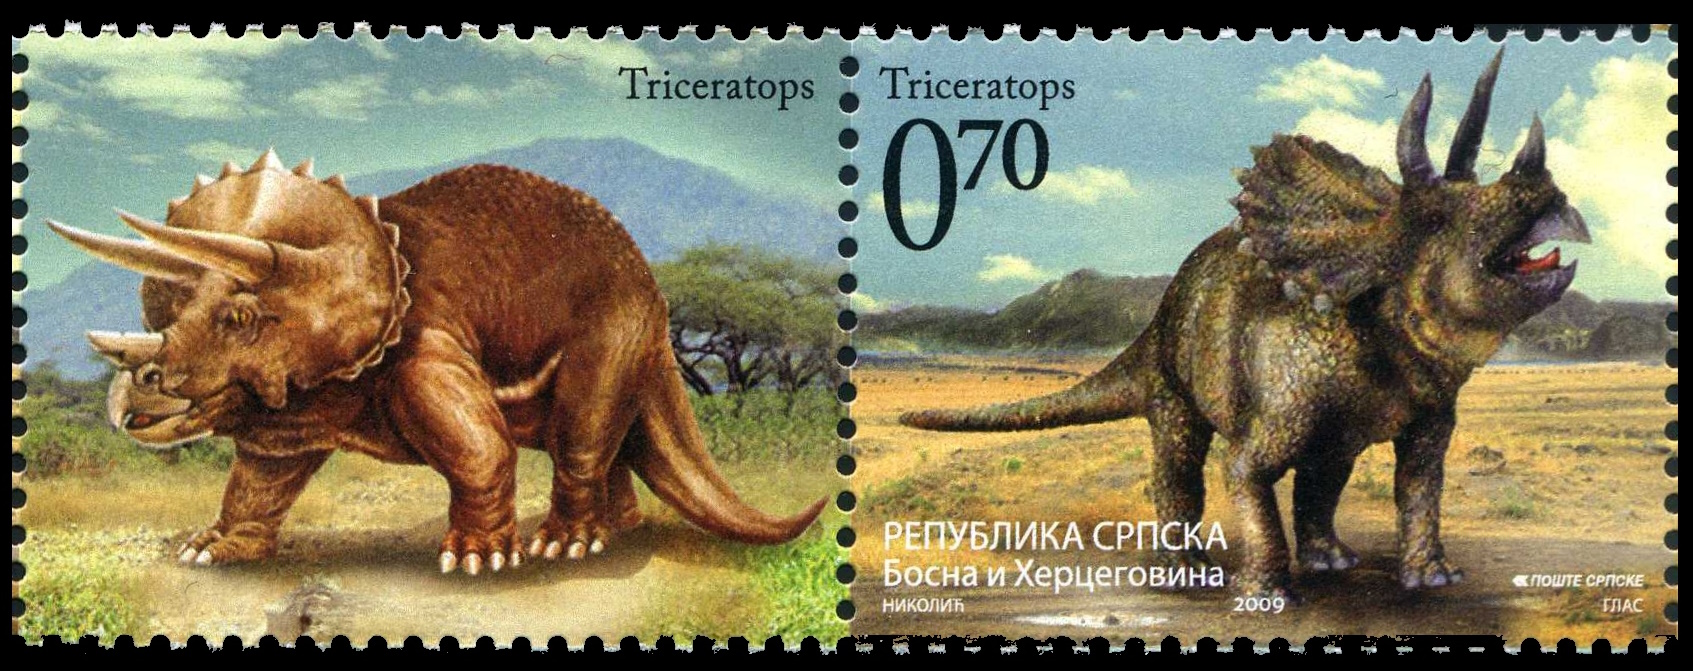 Triceratops stamp with a tab from the middle of the Mini-Sheet of Bosnia Herzegovina 2009